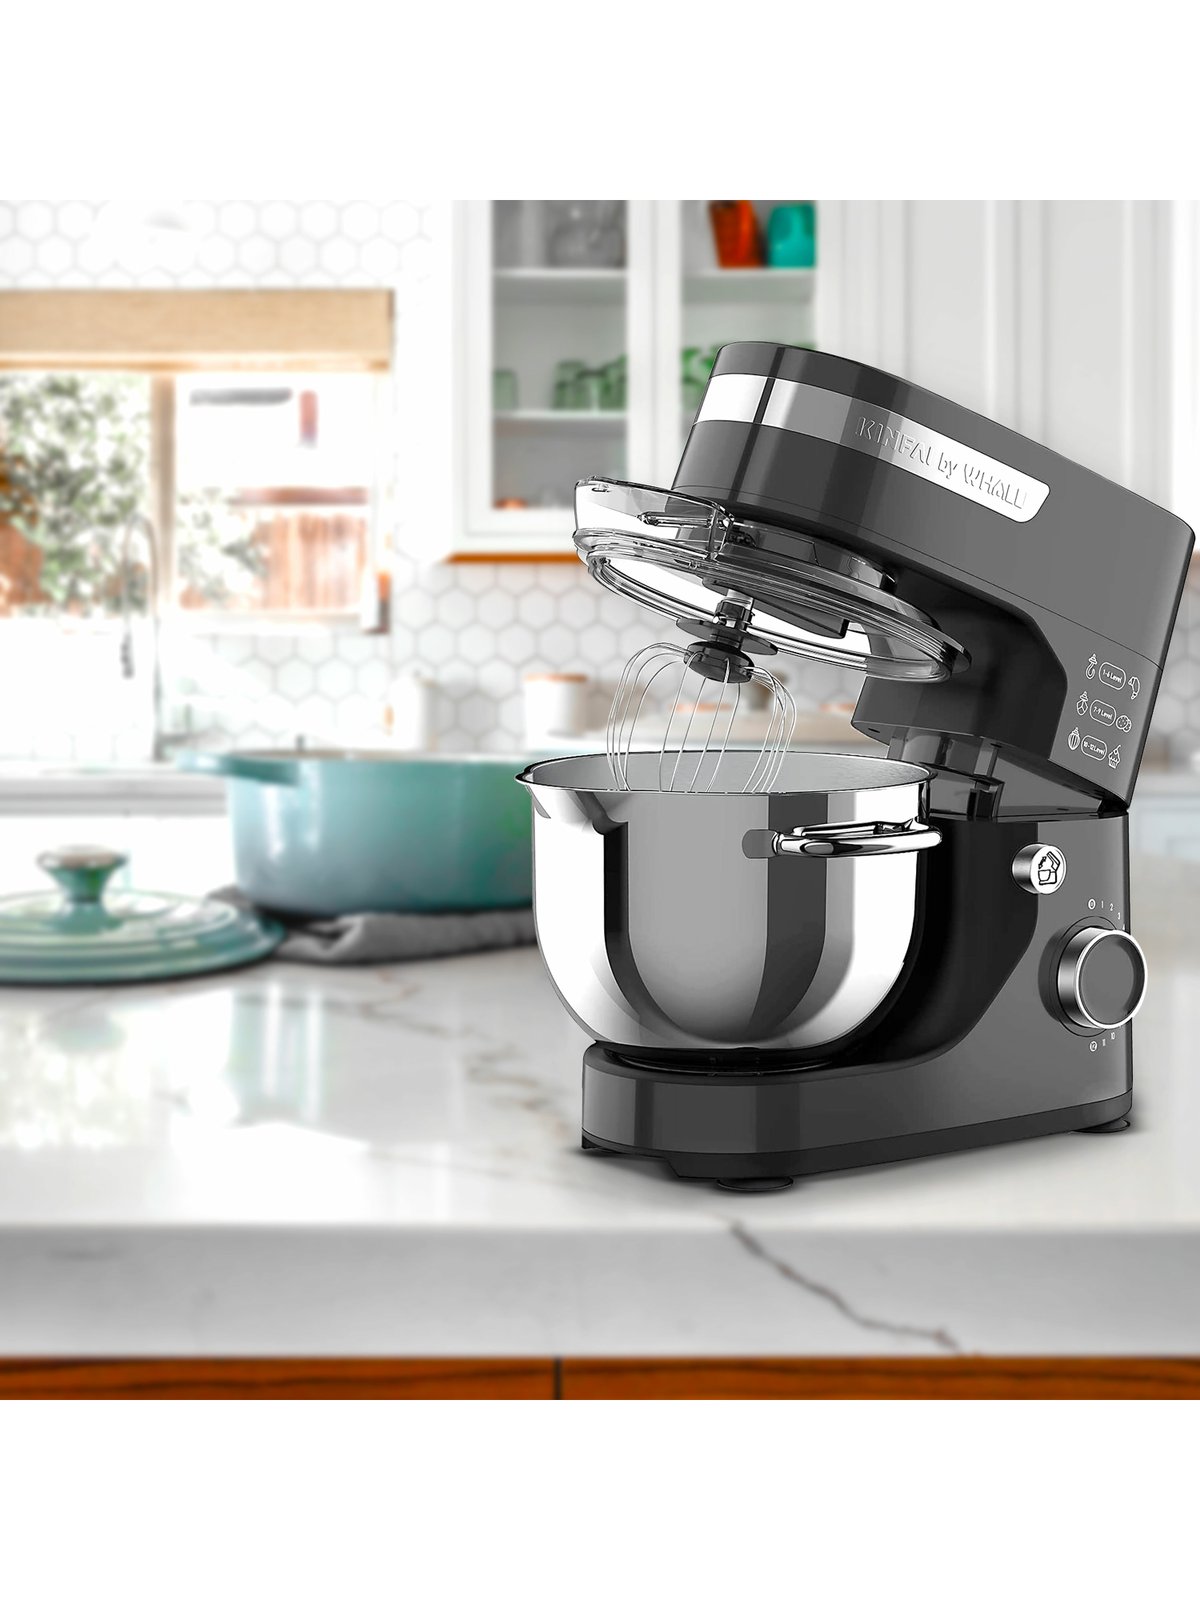 https://images.verishop.com/whall-whall-kinfai-electric-kitchen-stand-mixer-machine-with-45-quart-bowl-for-baking-dough-cooking-black/M00679283333527-3879215152?auto=format&cs=strip&fit=max&w=1200